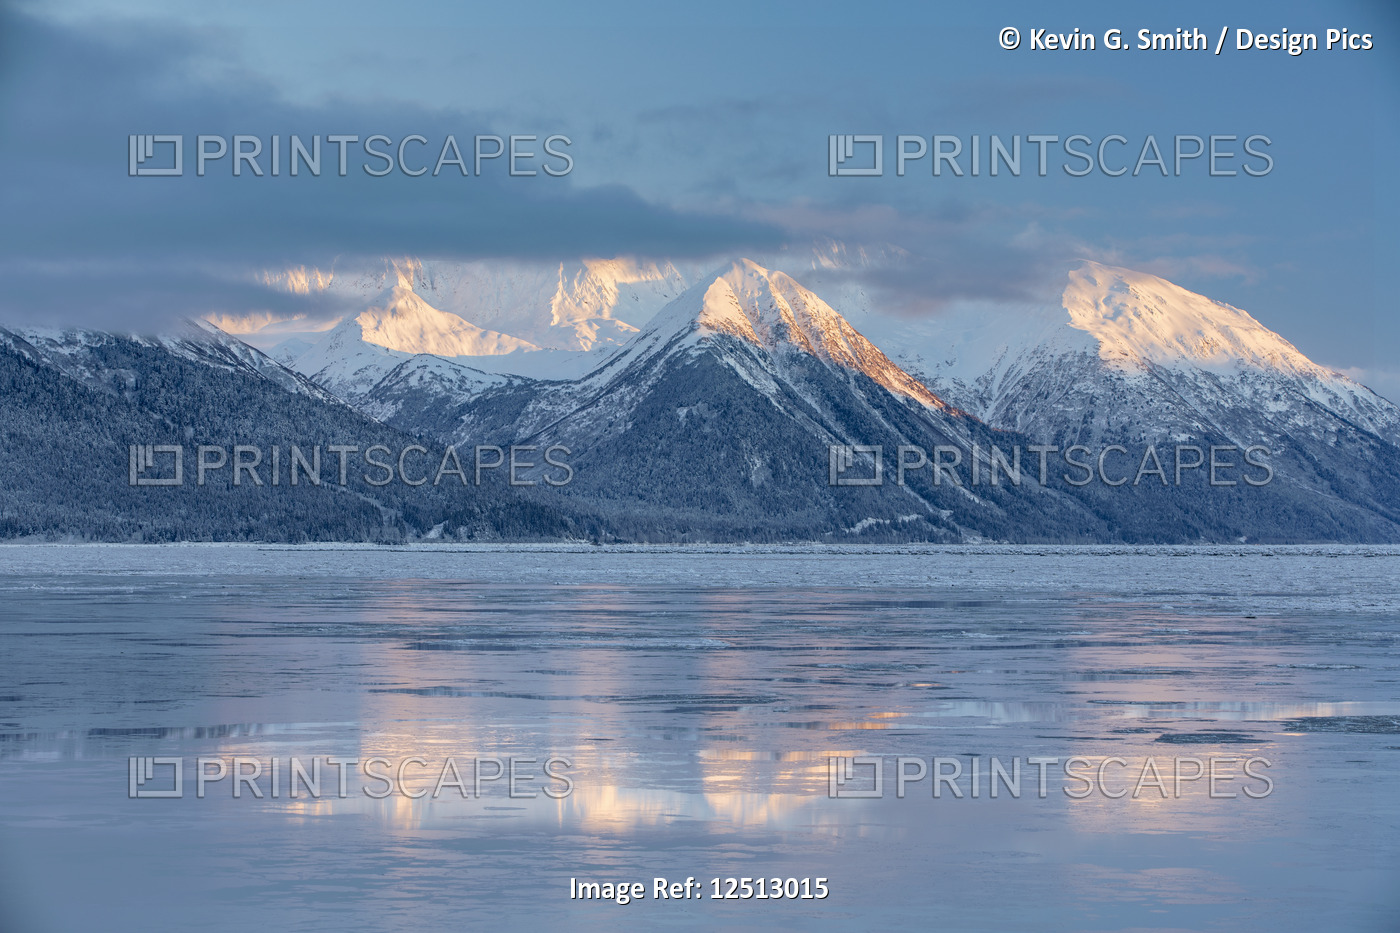 The warm light of sunset lights up the snow-covered peaks of Turnagain Pass, ...